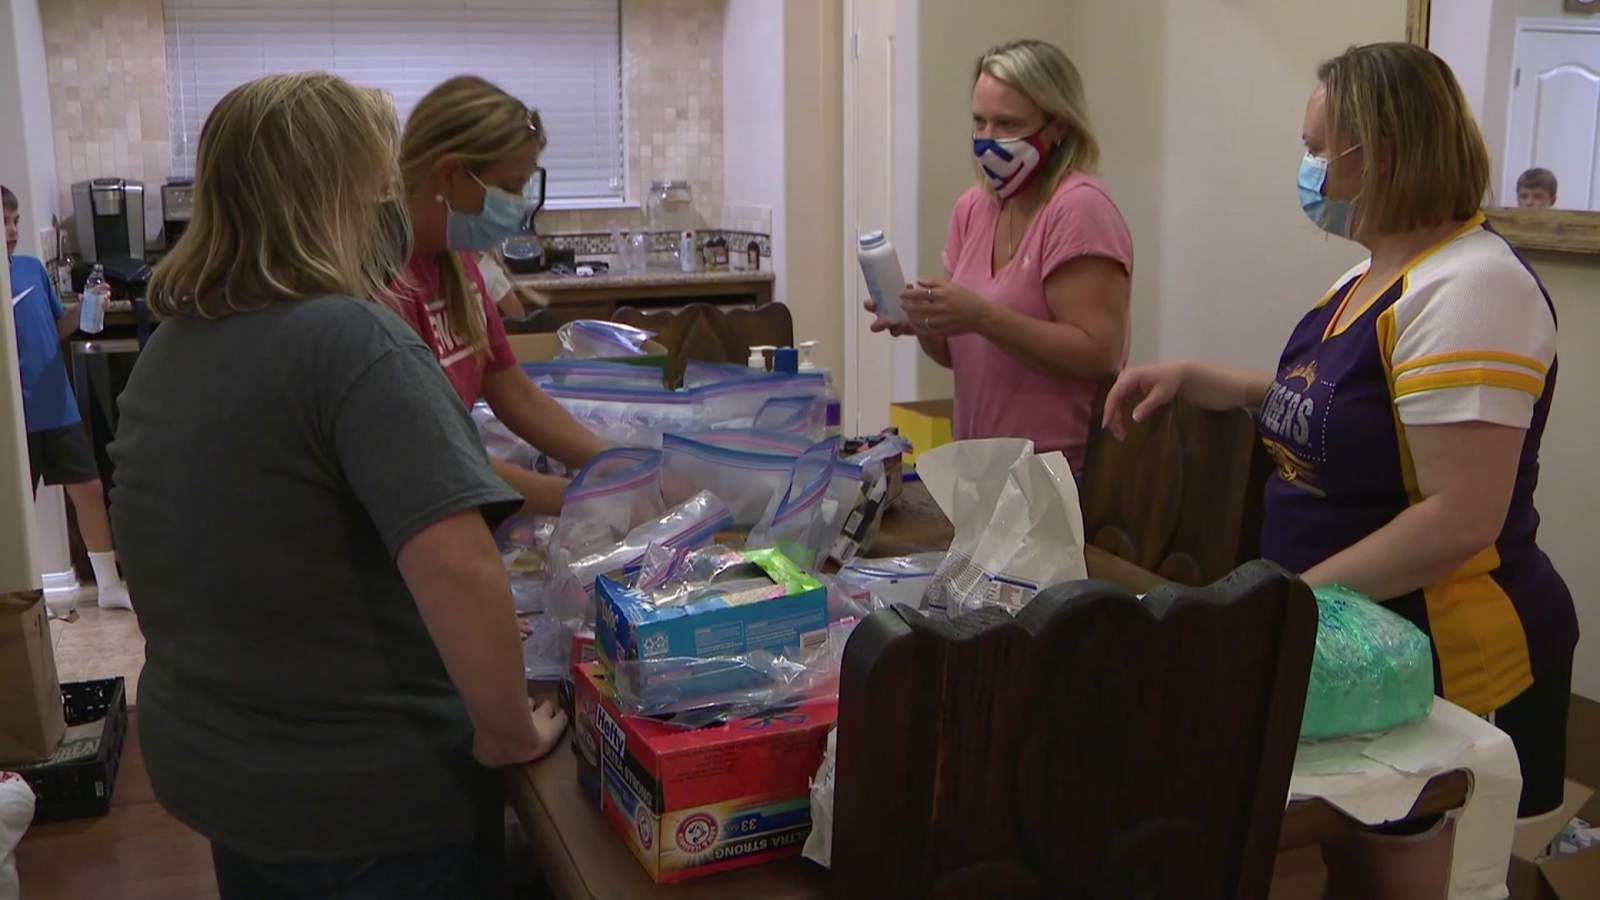 Tomball neighborhood bands together to make care packages for Louisiana victims of Hurricane Laura